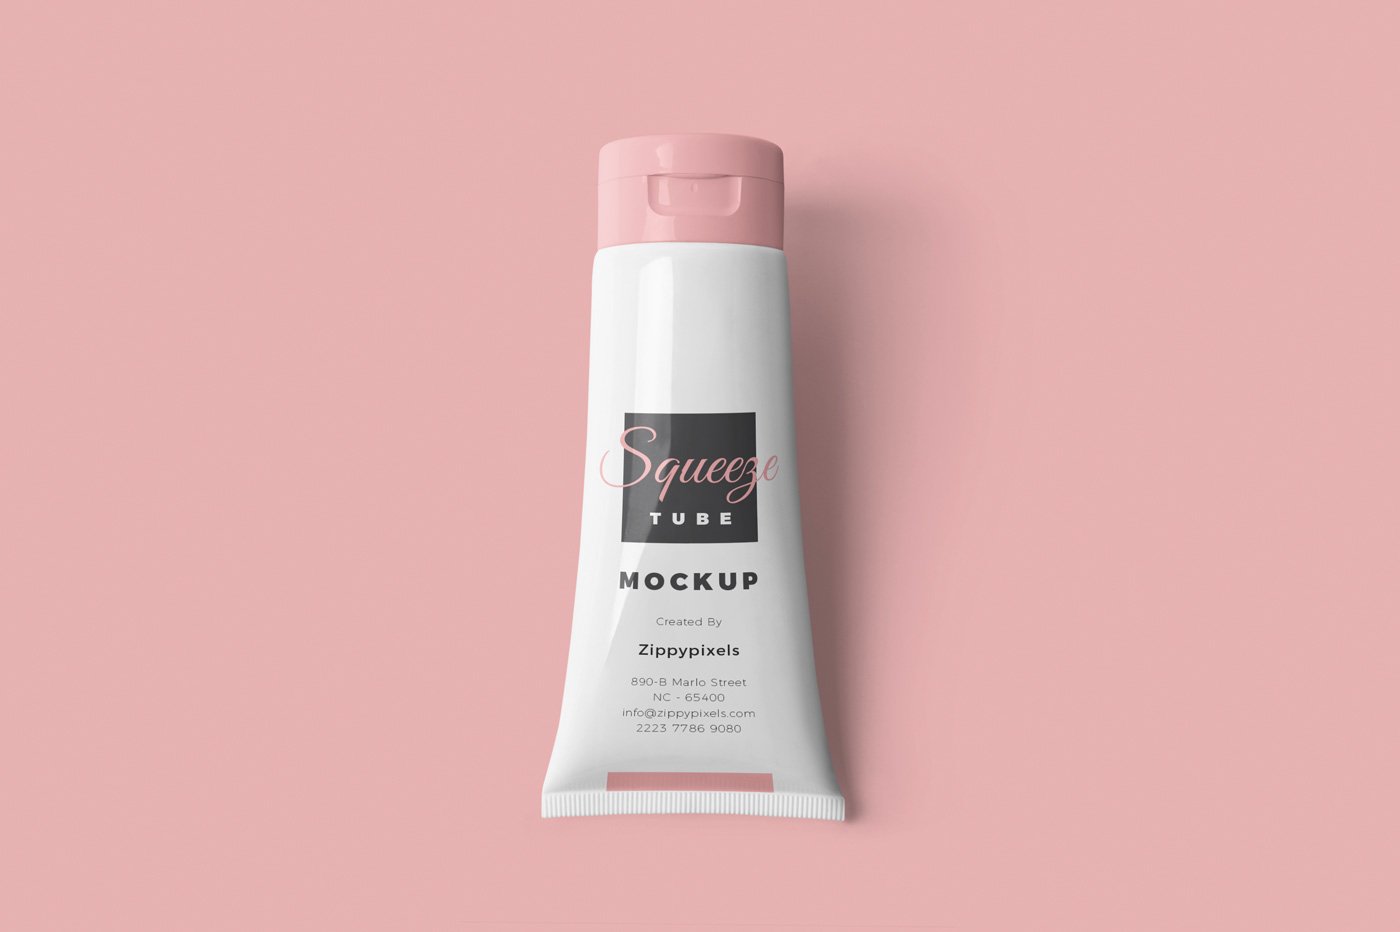 Download Squize Mockup Free - Premium PSD | Cosmetic white squeeze tube mockup : All free psd mockups you ...